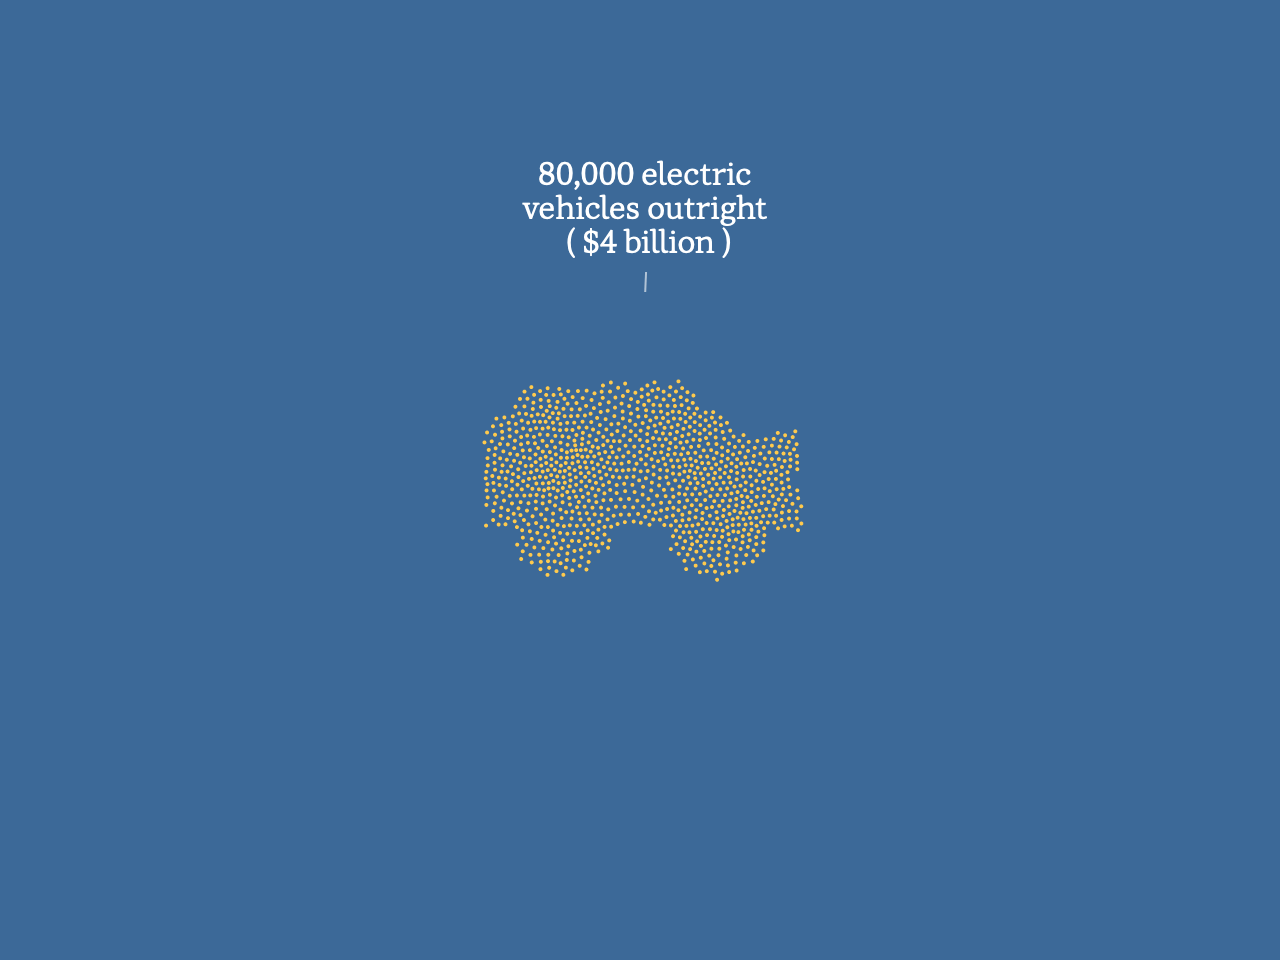 A graphic showing dots in the shape of a car, representing 80,000 electric vehicles at a cost of $4 billion.